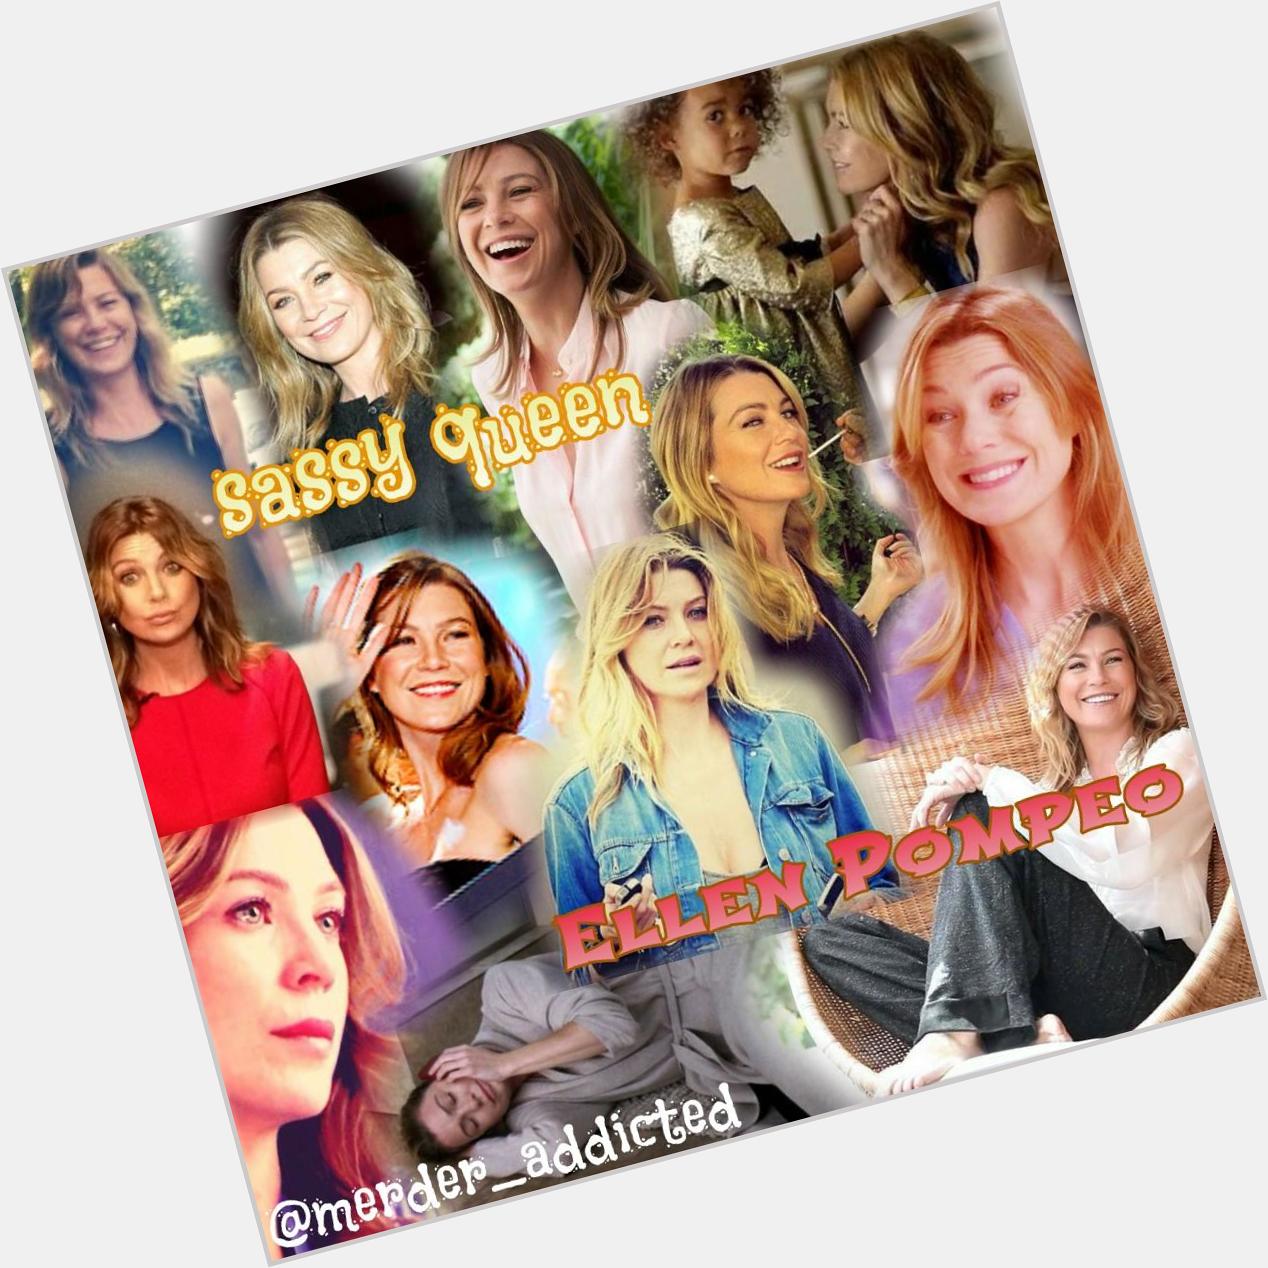 Ellen pompeo is the one&only sassy queen that kick ass&rock it cause she is the bomb so..HAPPY BIRTHDAY 